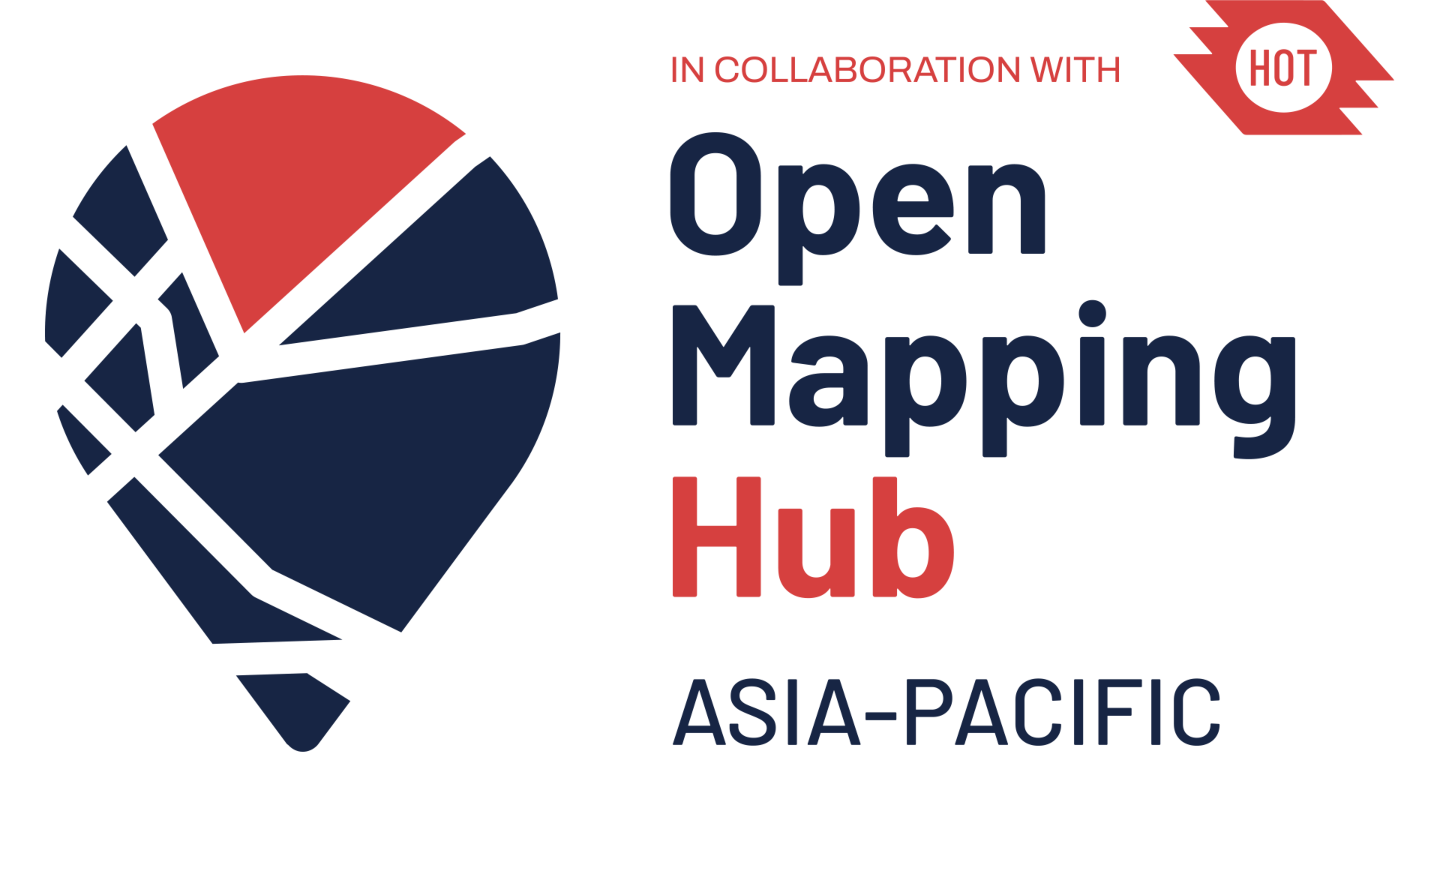 HOT Mapping Hub - Asia Pacific